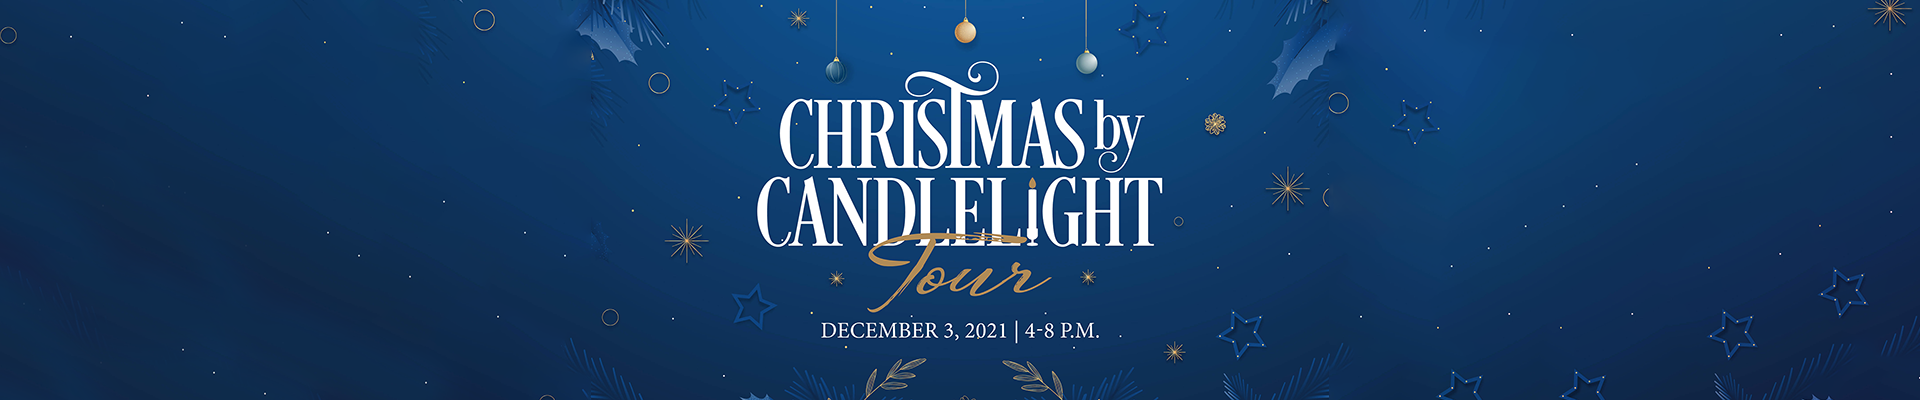 Christmas by Candlelight Tour